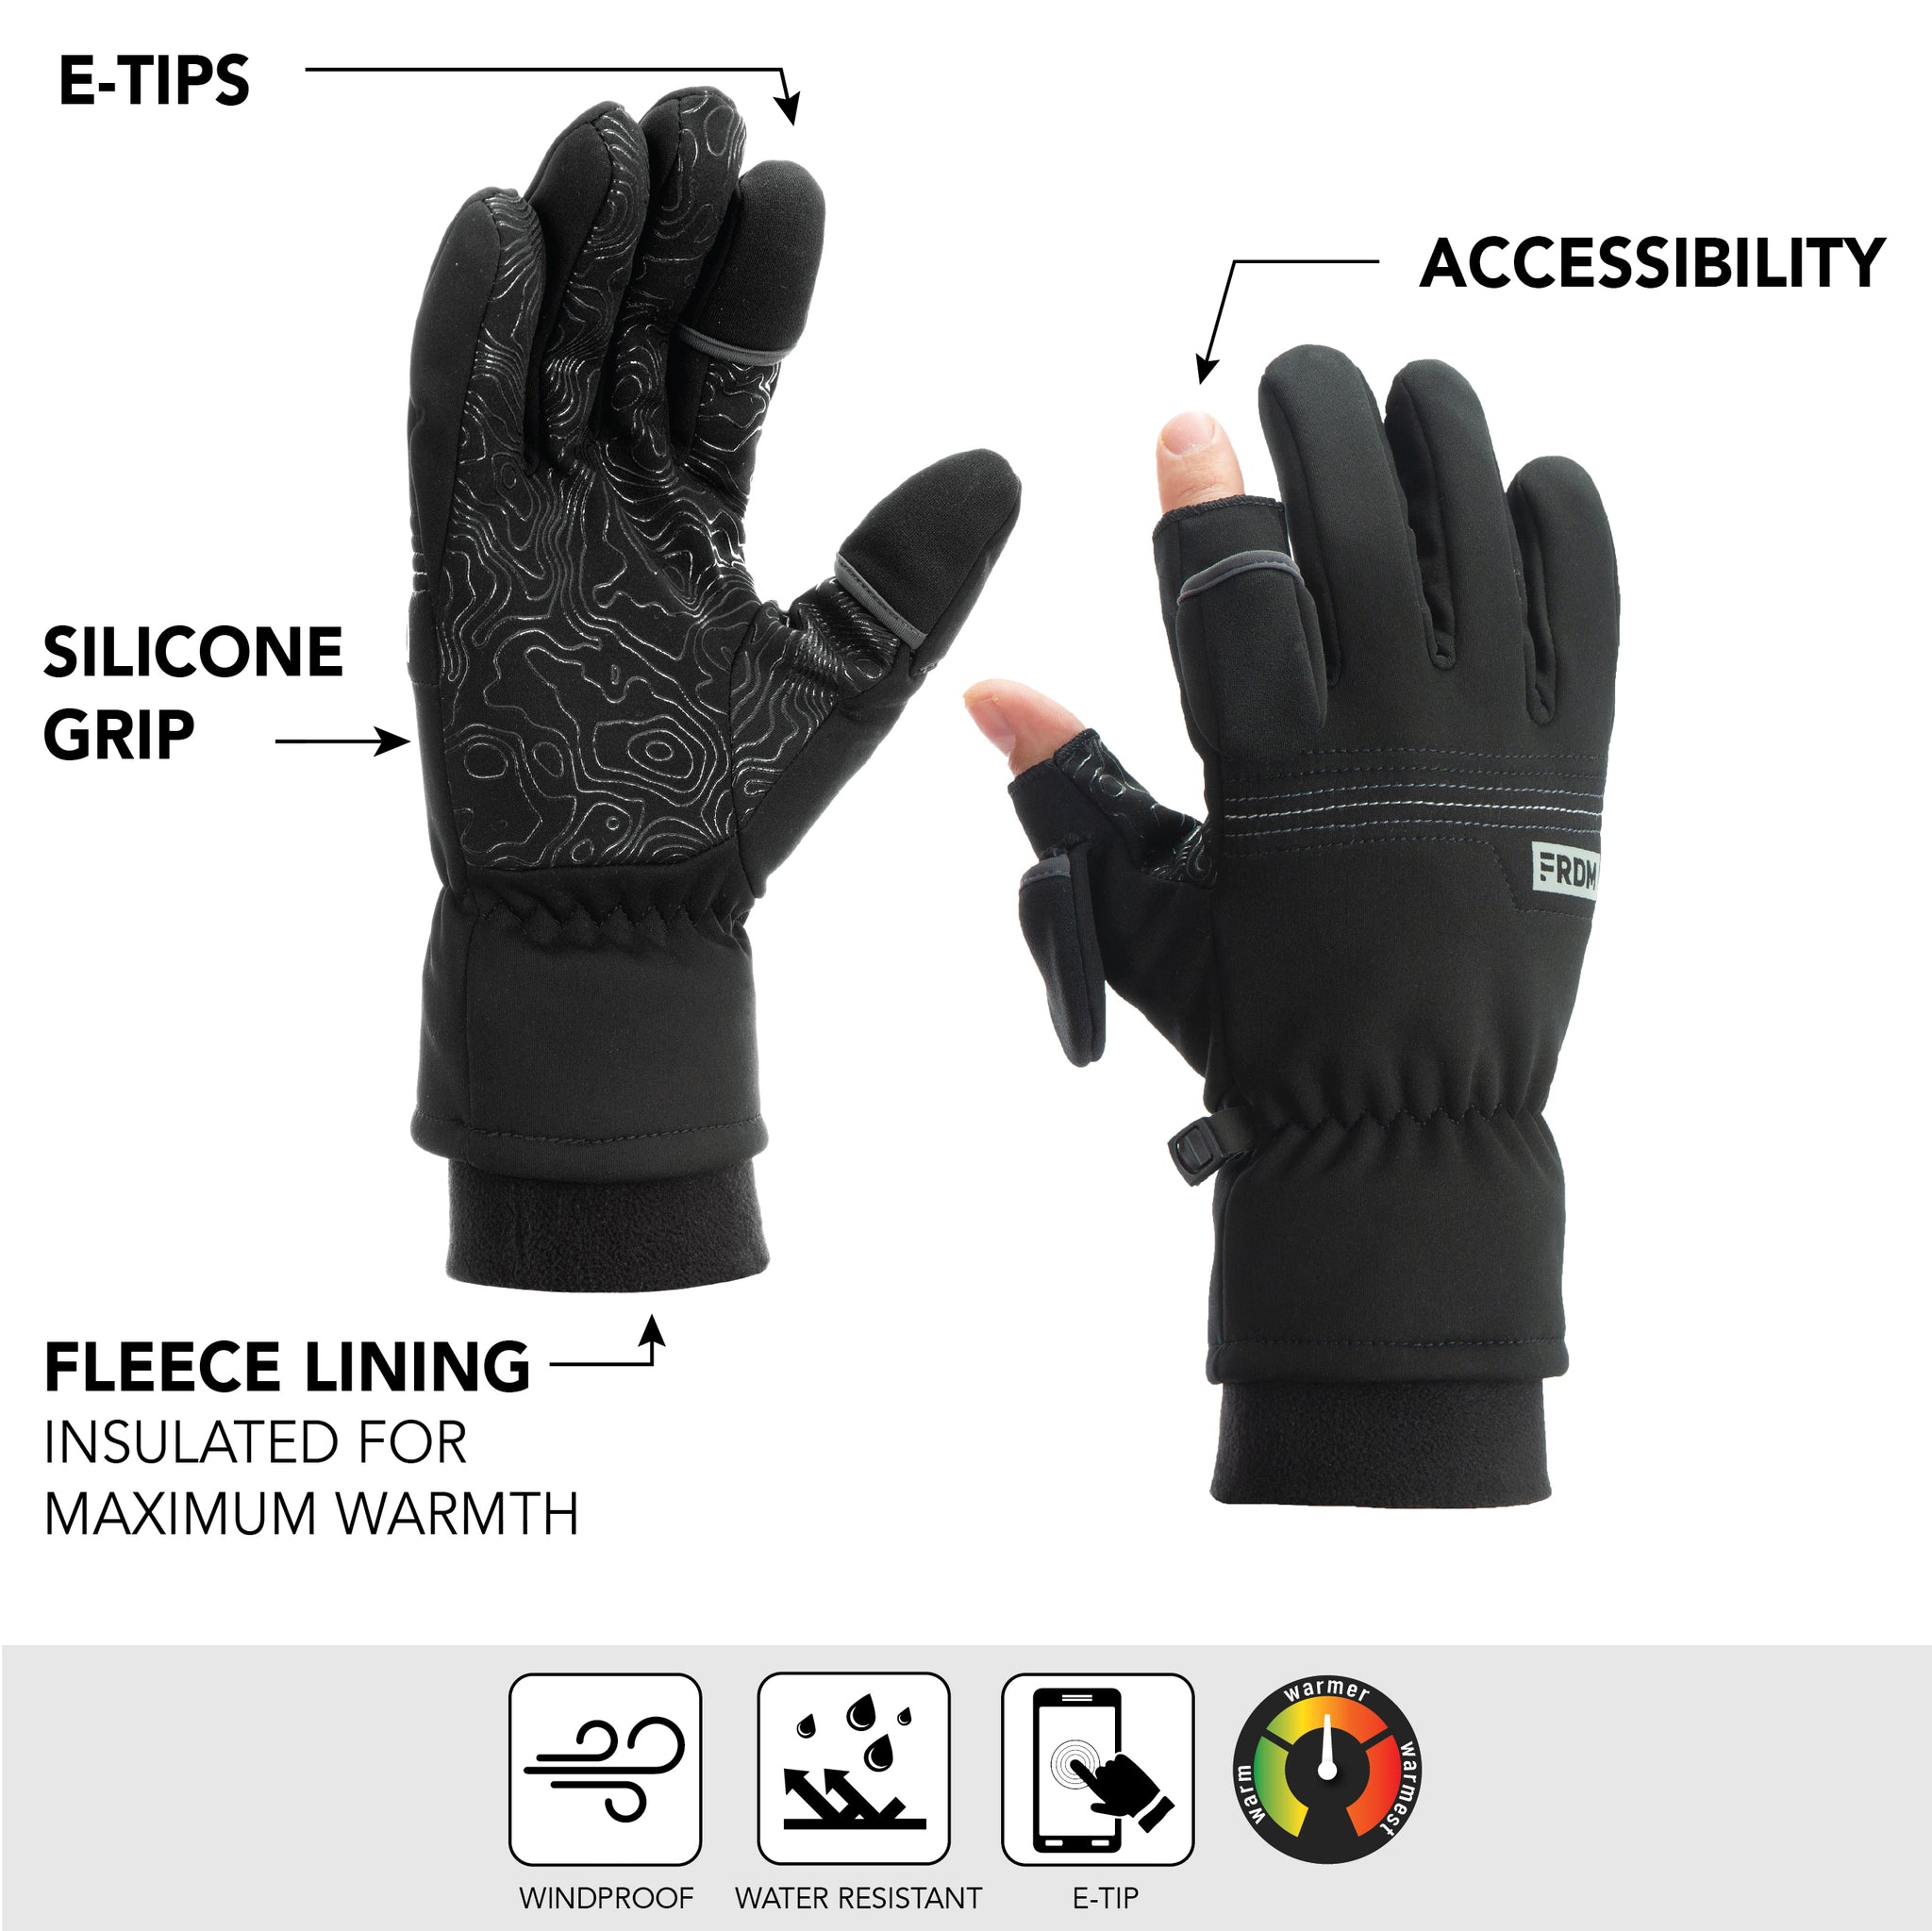 Free Fit Gloves from FRDM | Midweight 2-Finger Winter Gloves Black/Gray / L